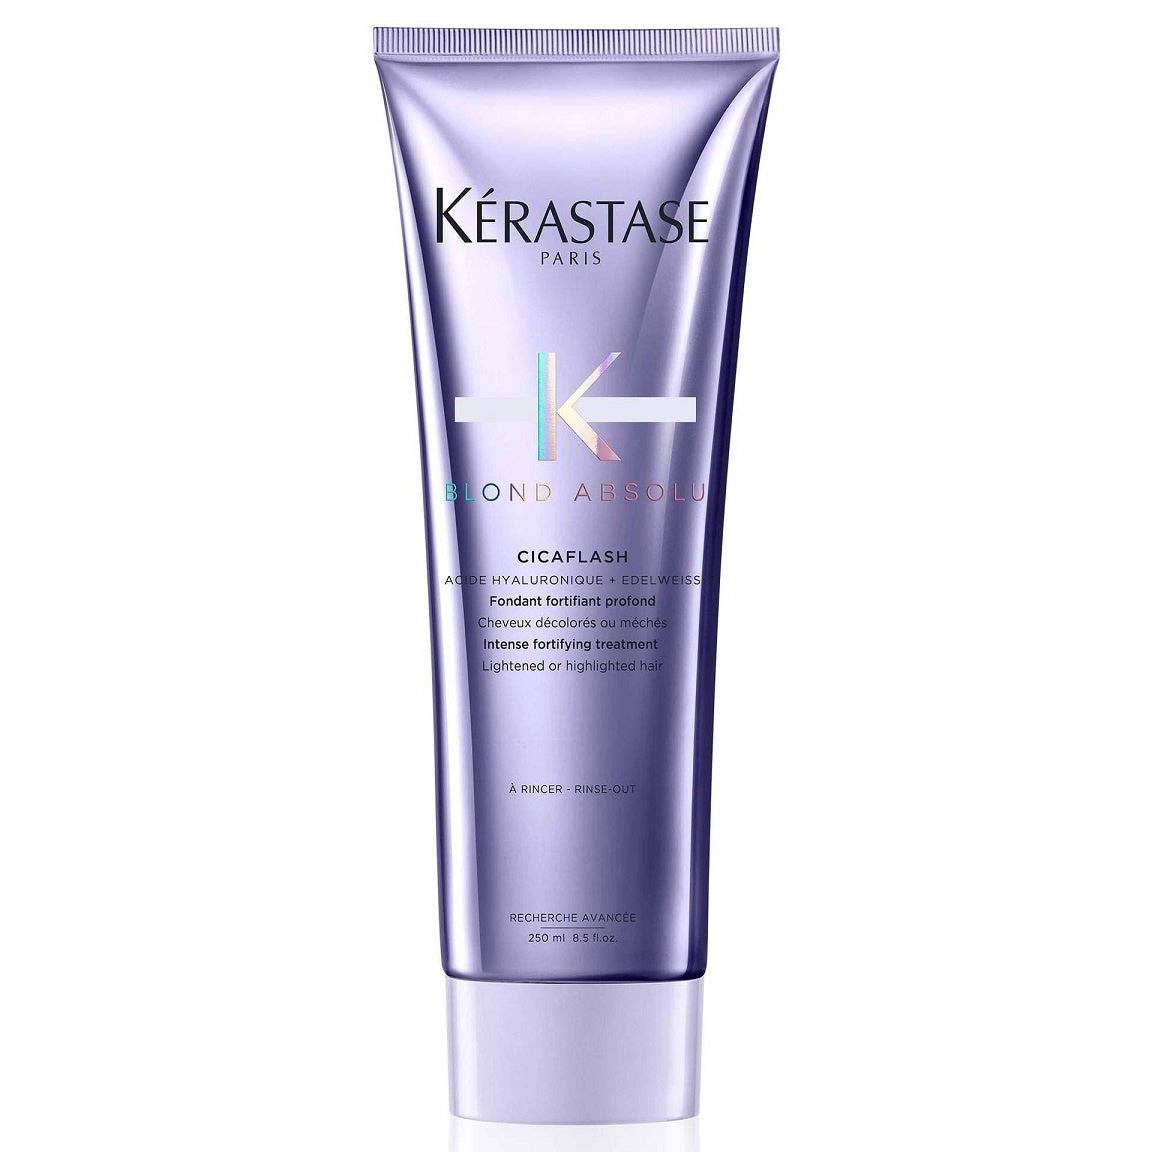 A hydrating and illuminating conditioner from the Kerastase Blond Absolu collection.